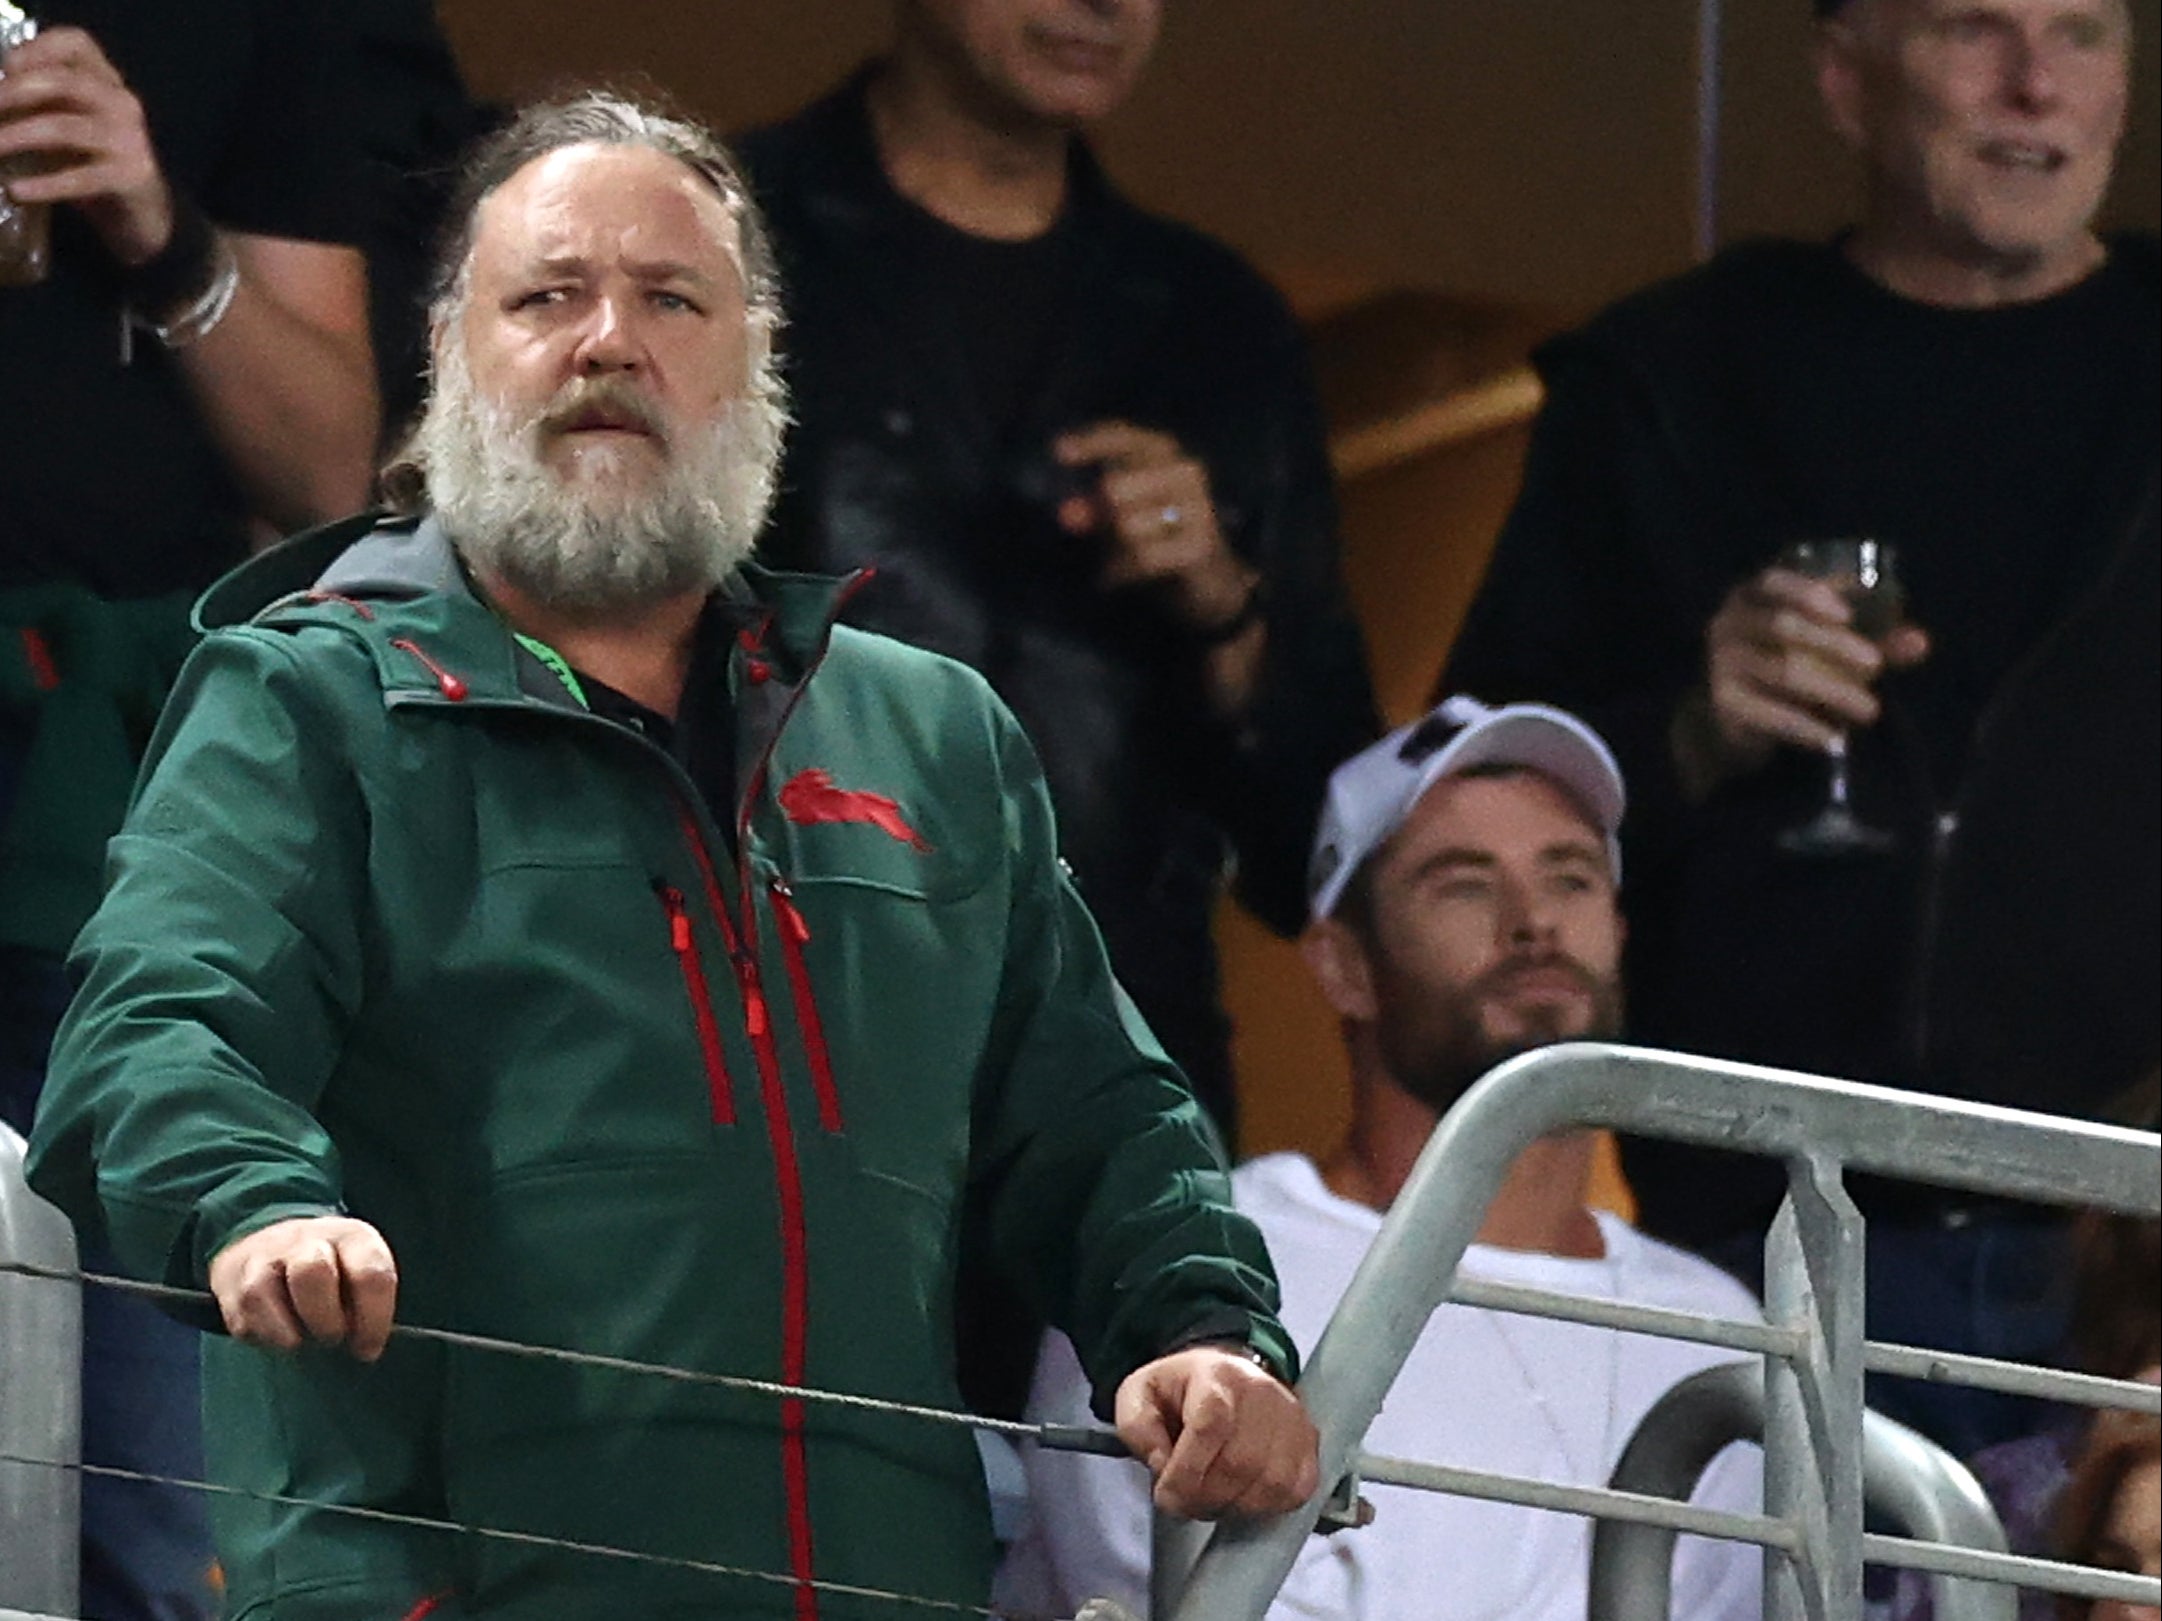 Russell Crowe at a rugby match on 26 March 2021 in Sydney, Australia, next to Chris Hemsworth